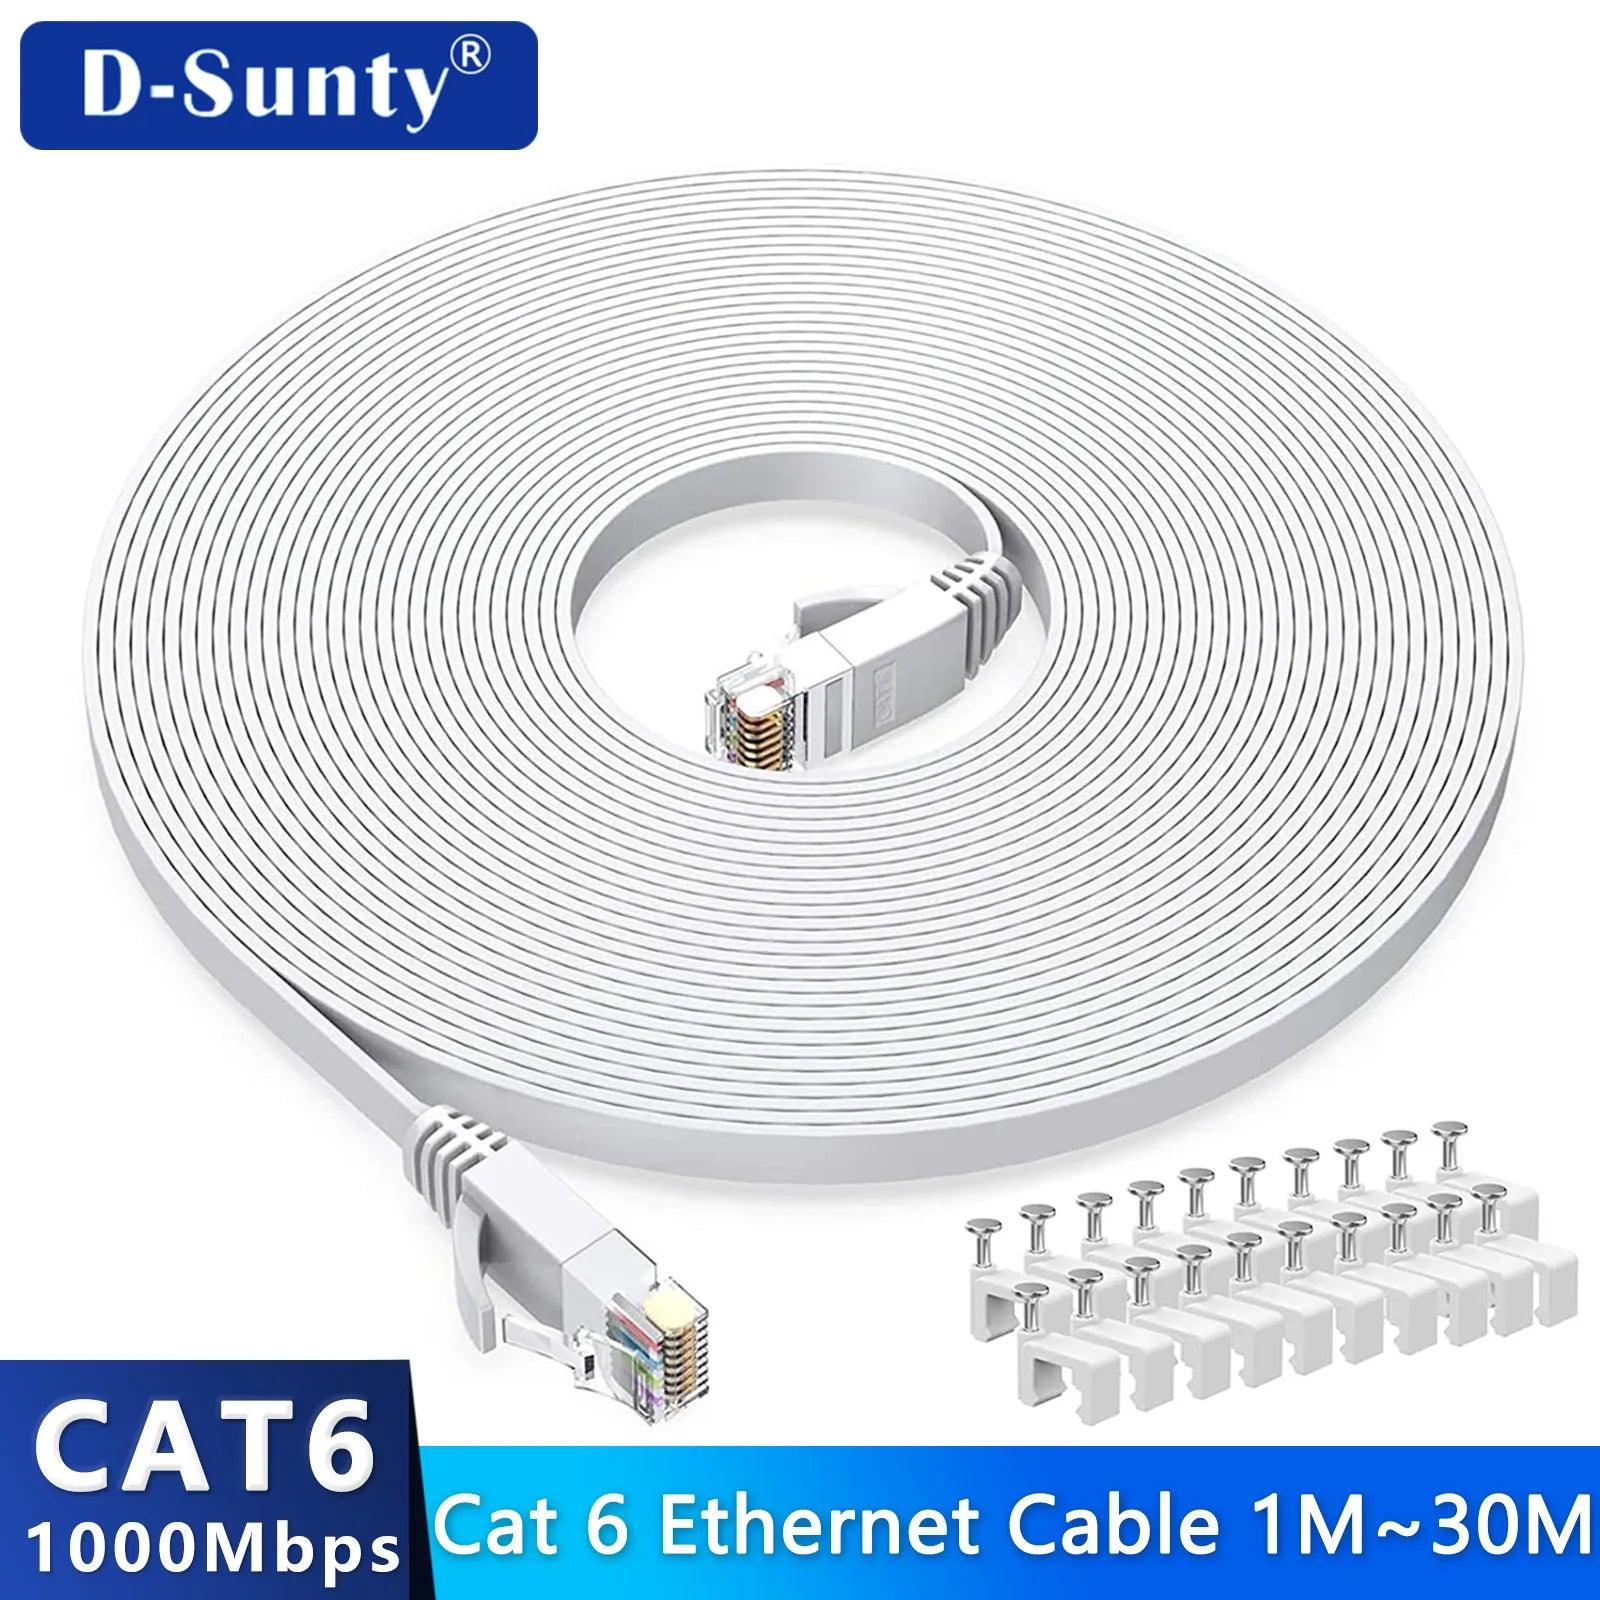 Flat Cat6 Ethernet Cable for High-Speed Internet and Network Connectivity  ourlum.com   